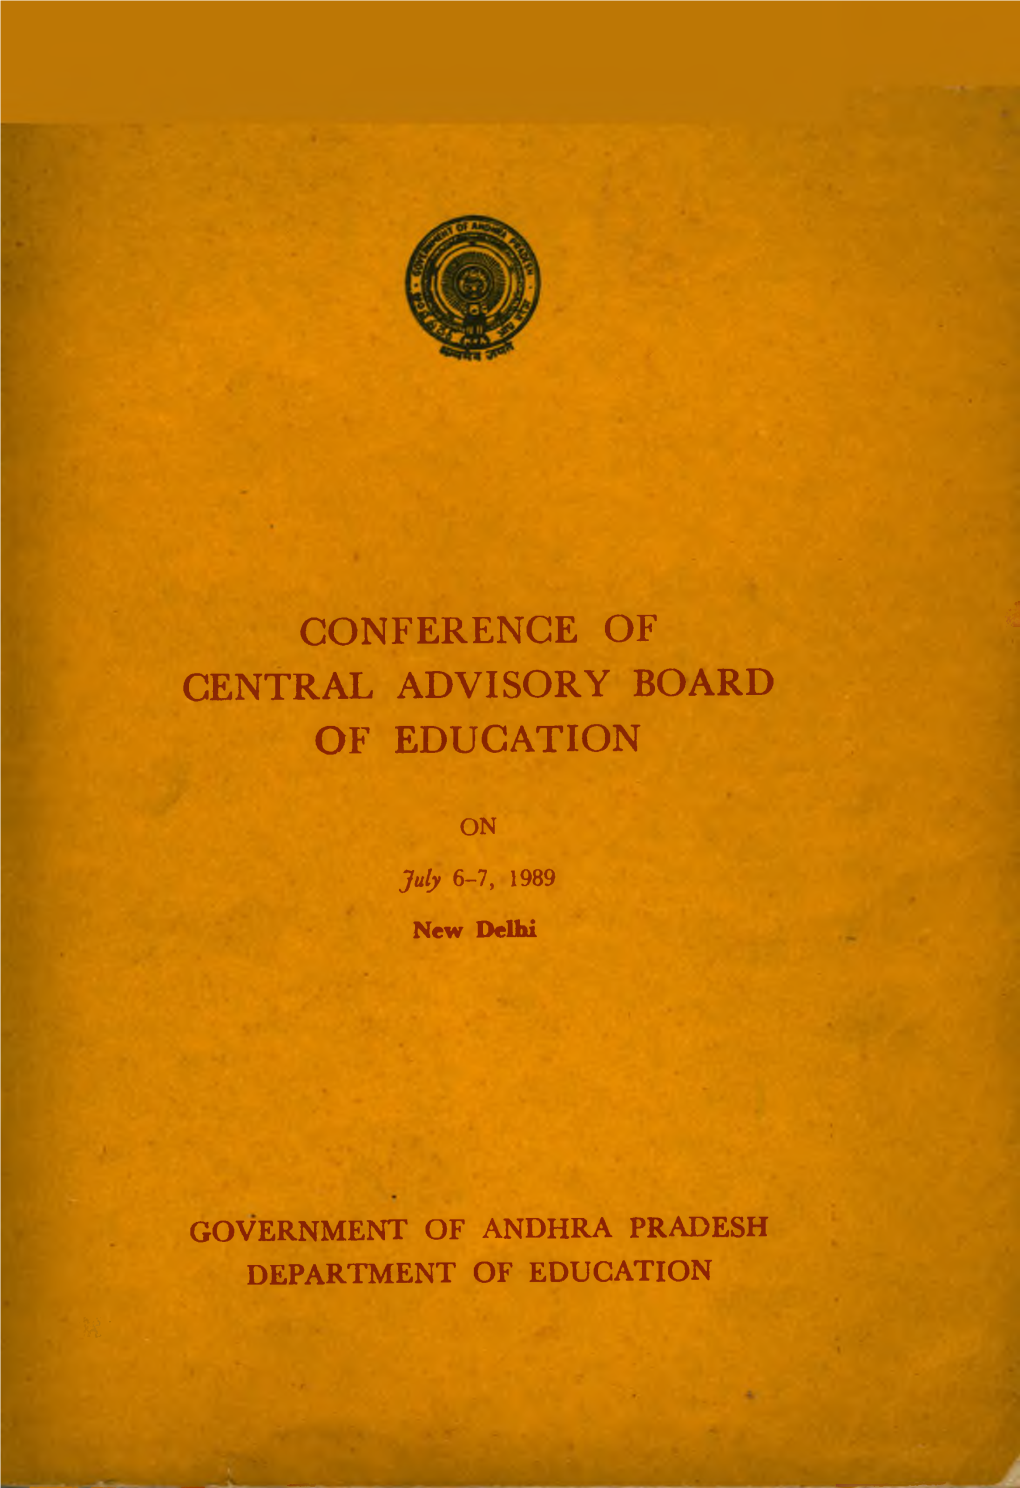 Conference of Central Advisory Board of Education on July 6-7, 1989 New Delhi